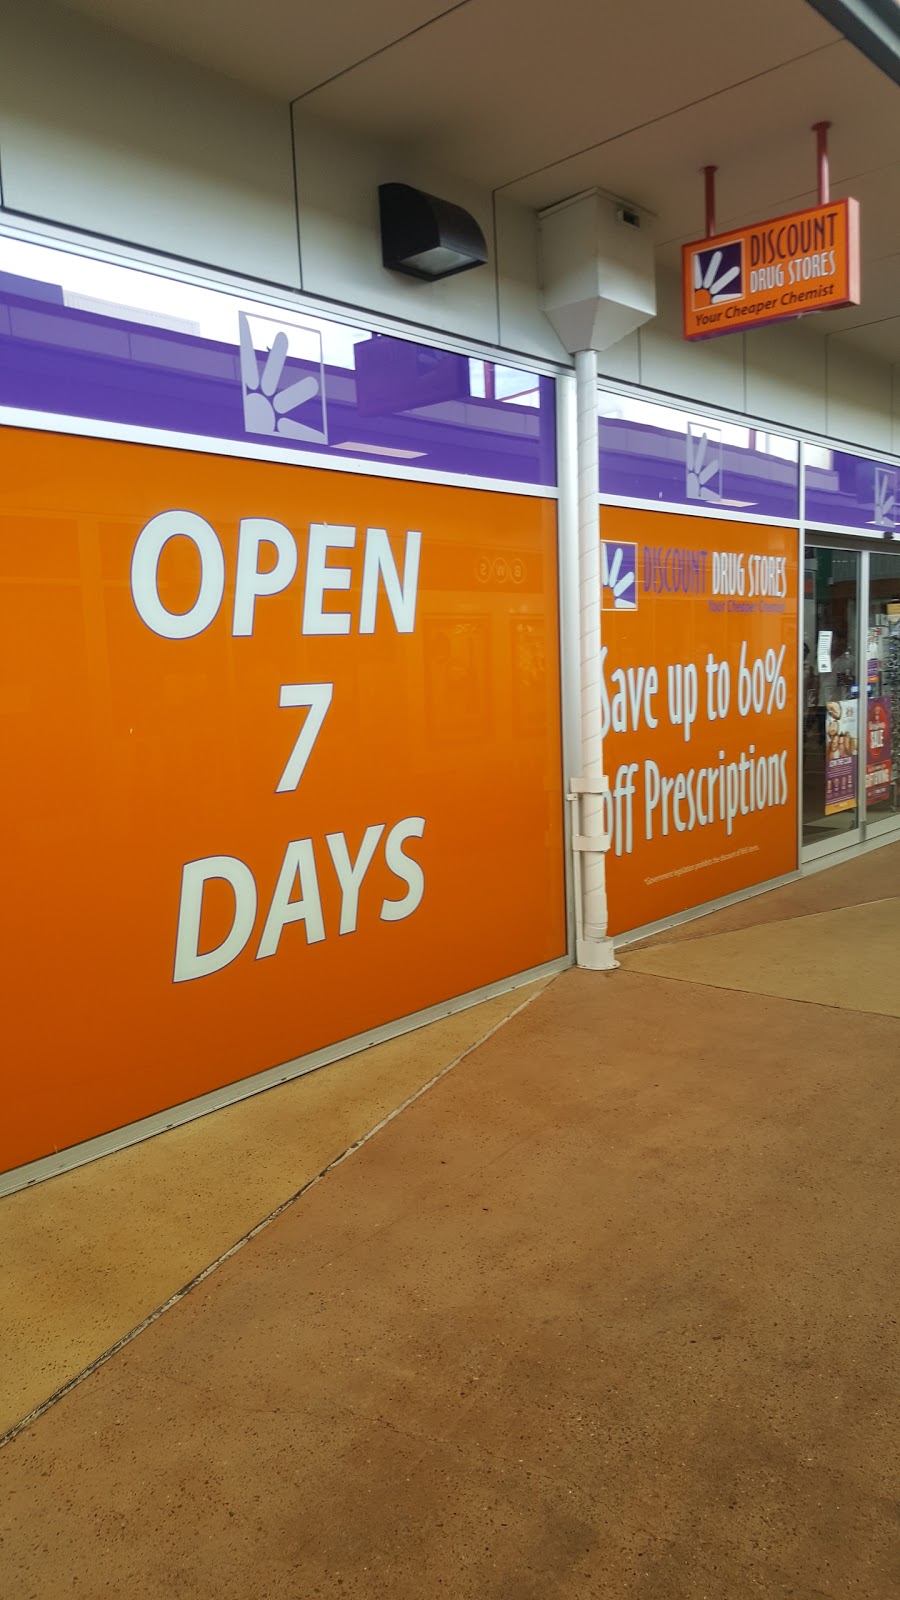 Eight Mile Plains Discount Drug Stores | pharmacy | 261 Warrigal Rd & Cnr of, Underwood Rd, Eight Mile Plains QLD 4113, Australia | 0733417700 OR +61 7 3341 7700